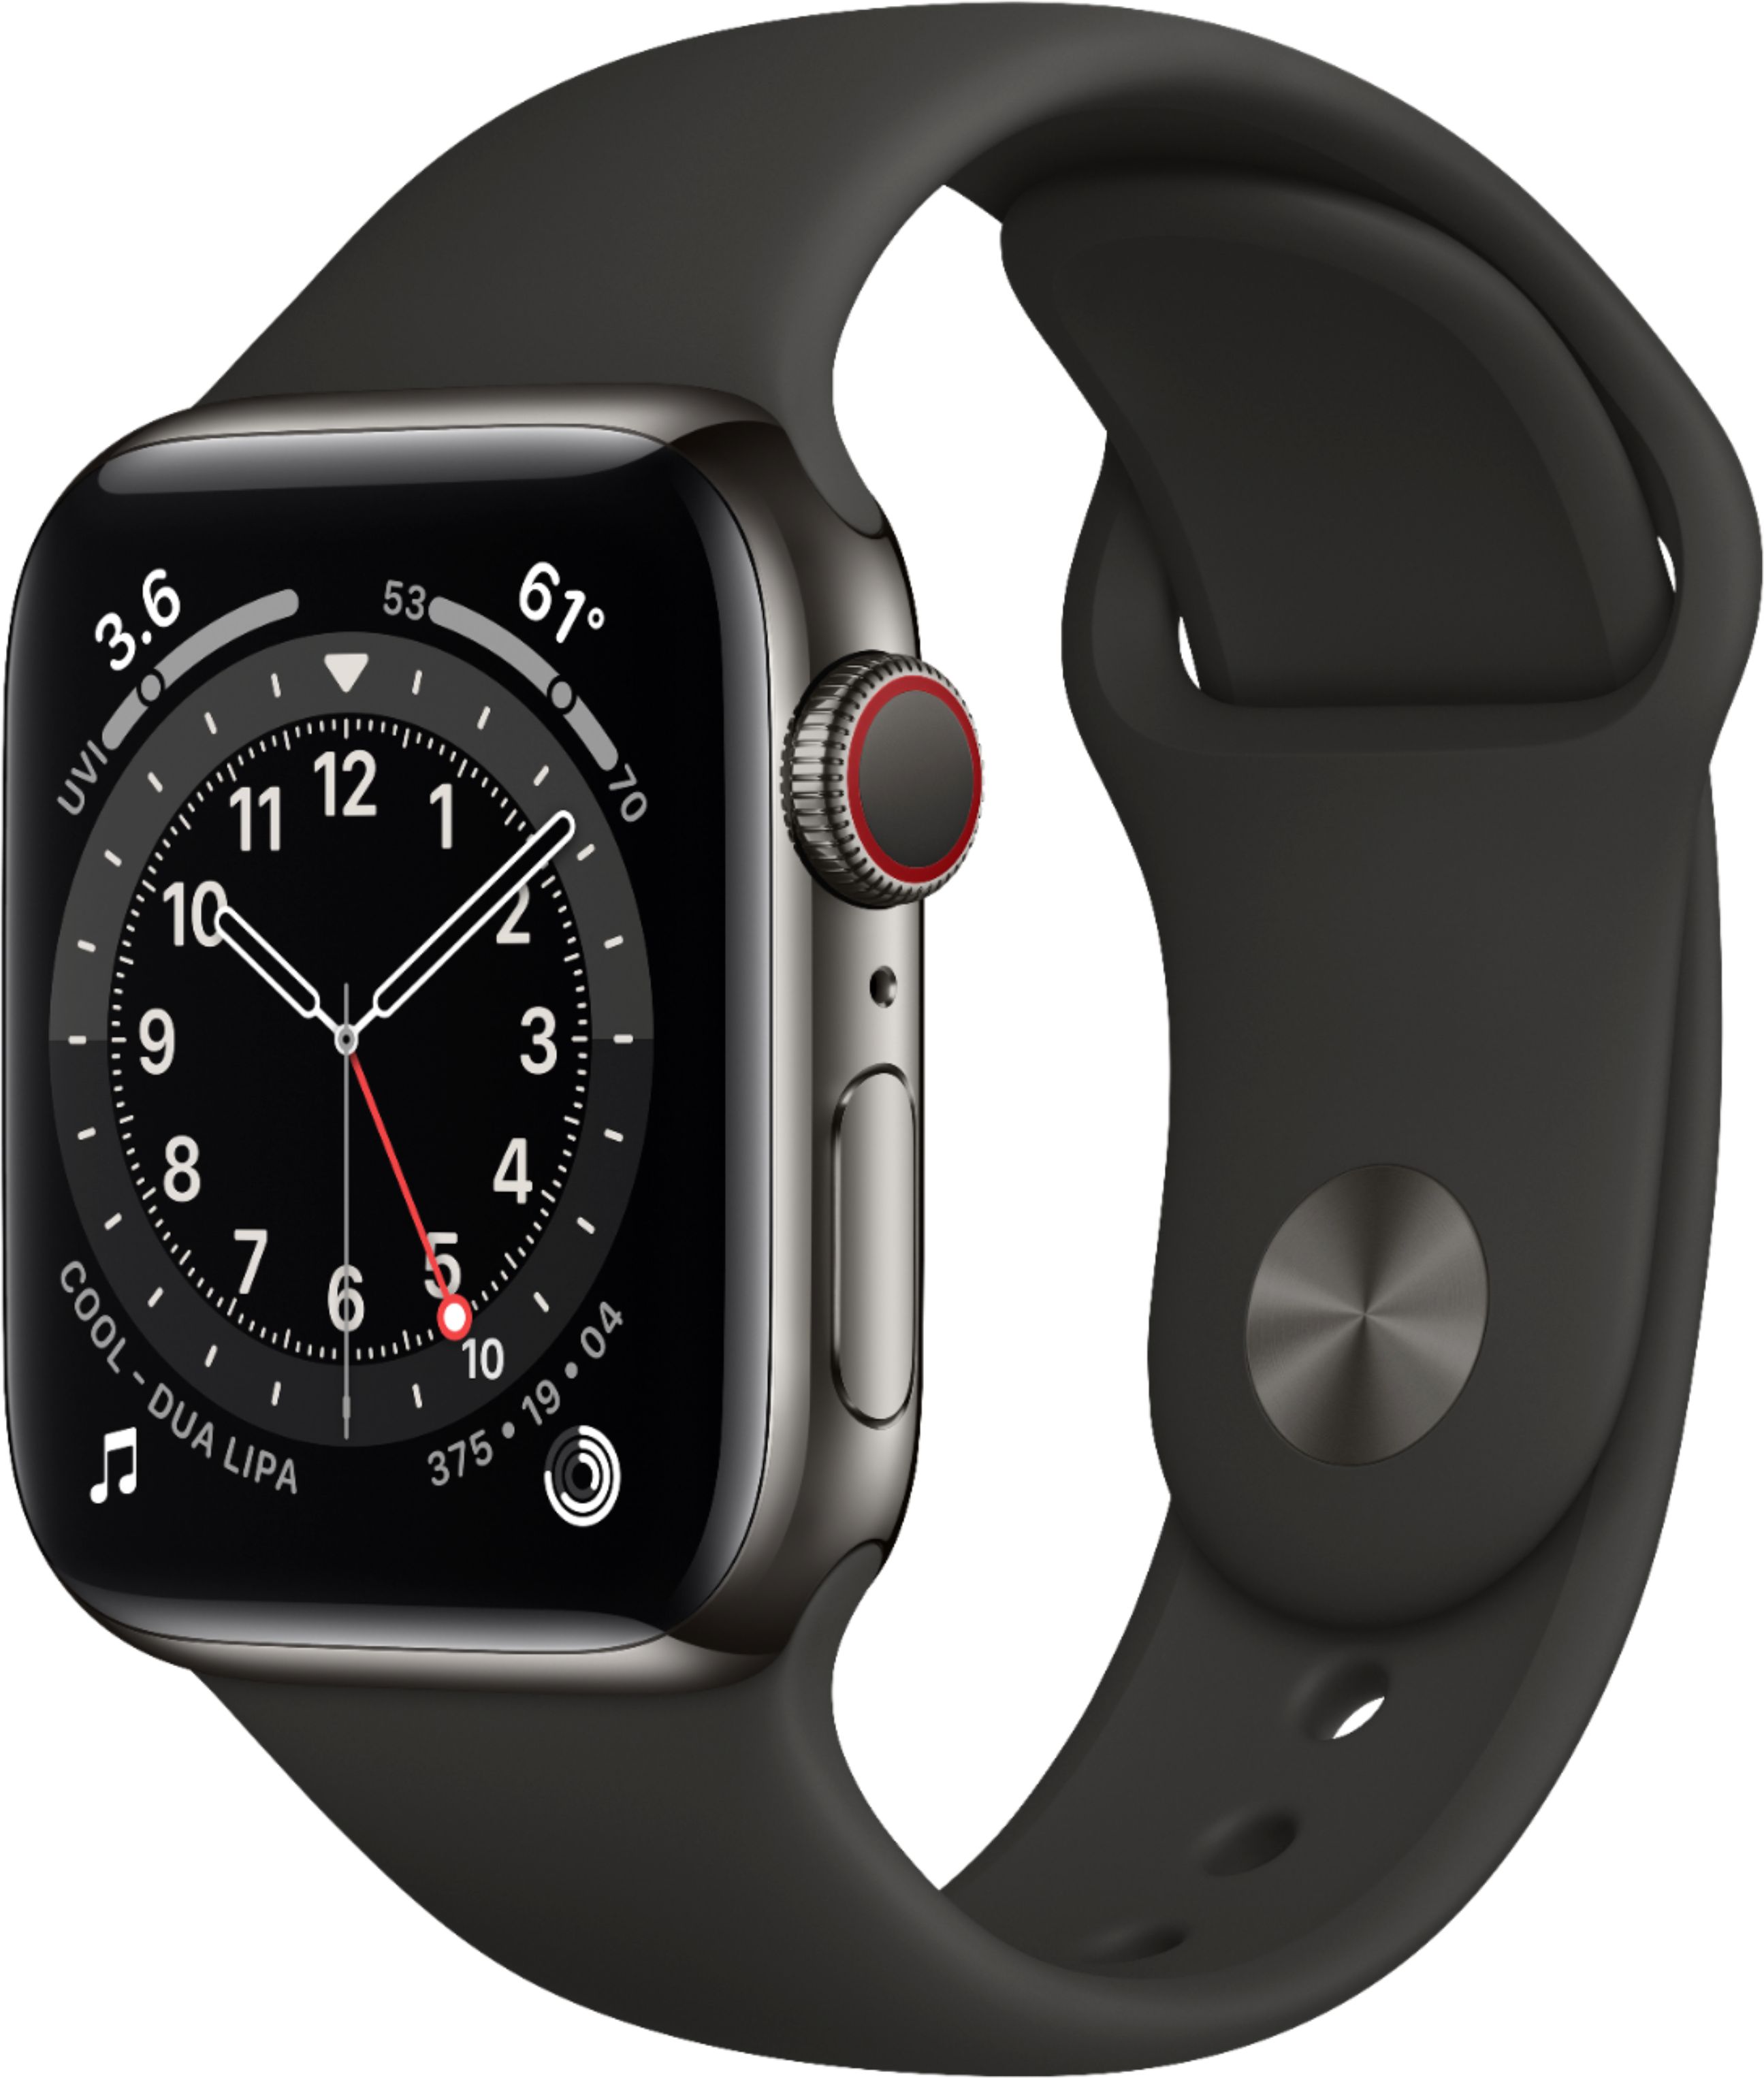 Apple Watch graphite with silver buckle band | MacRumors Forums